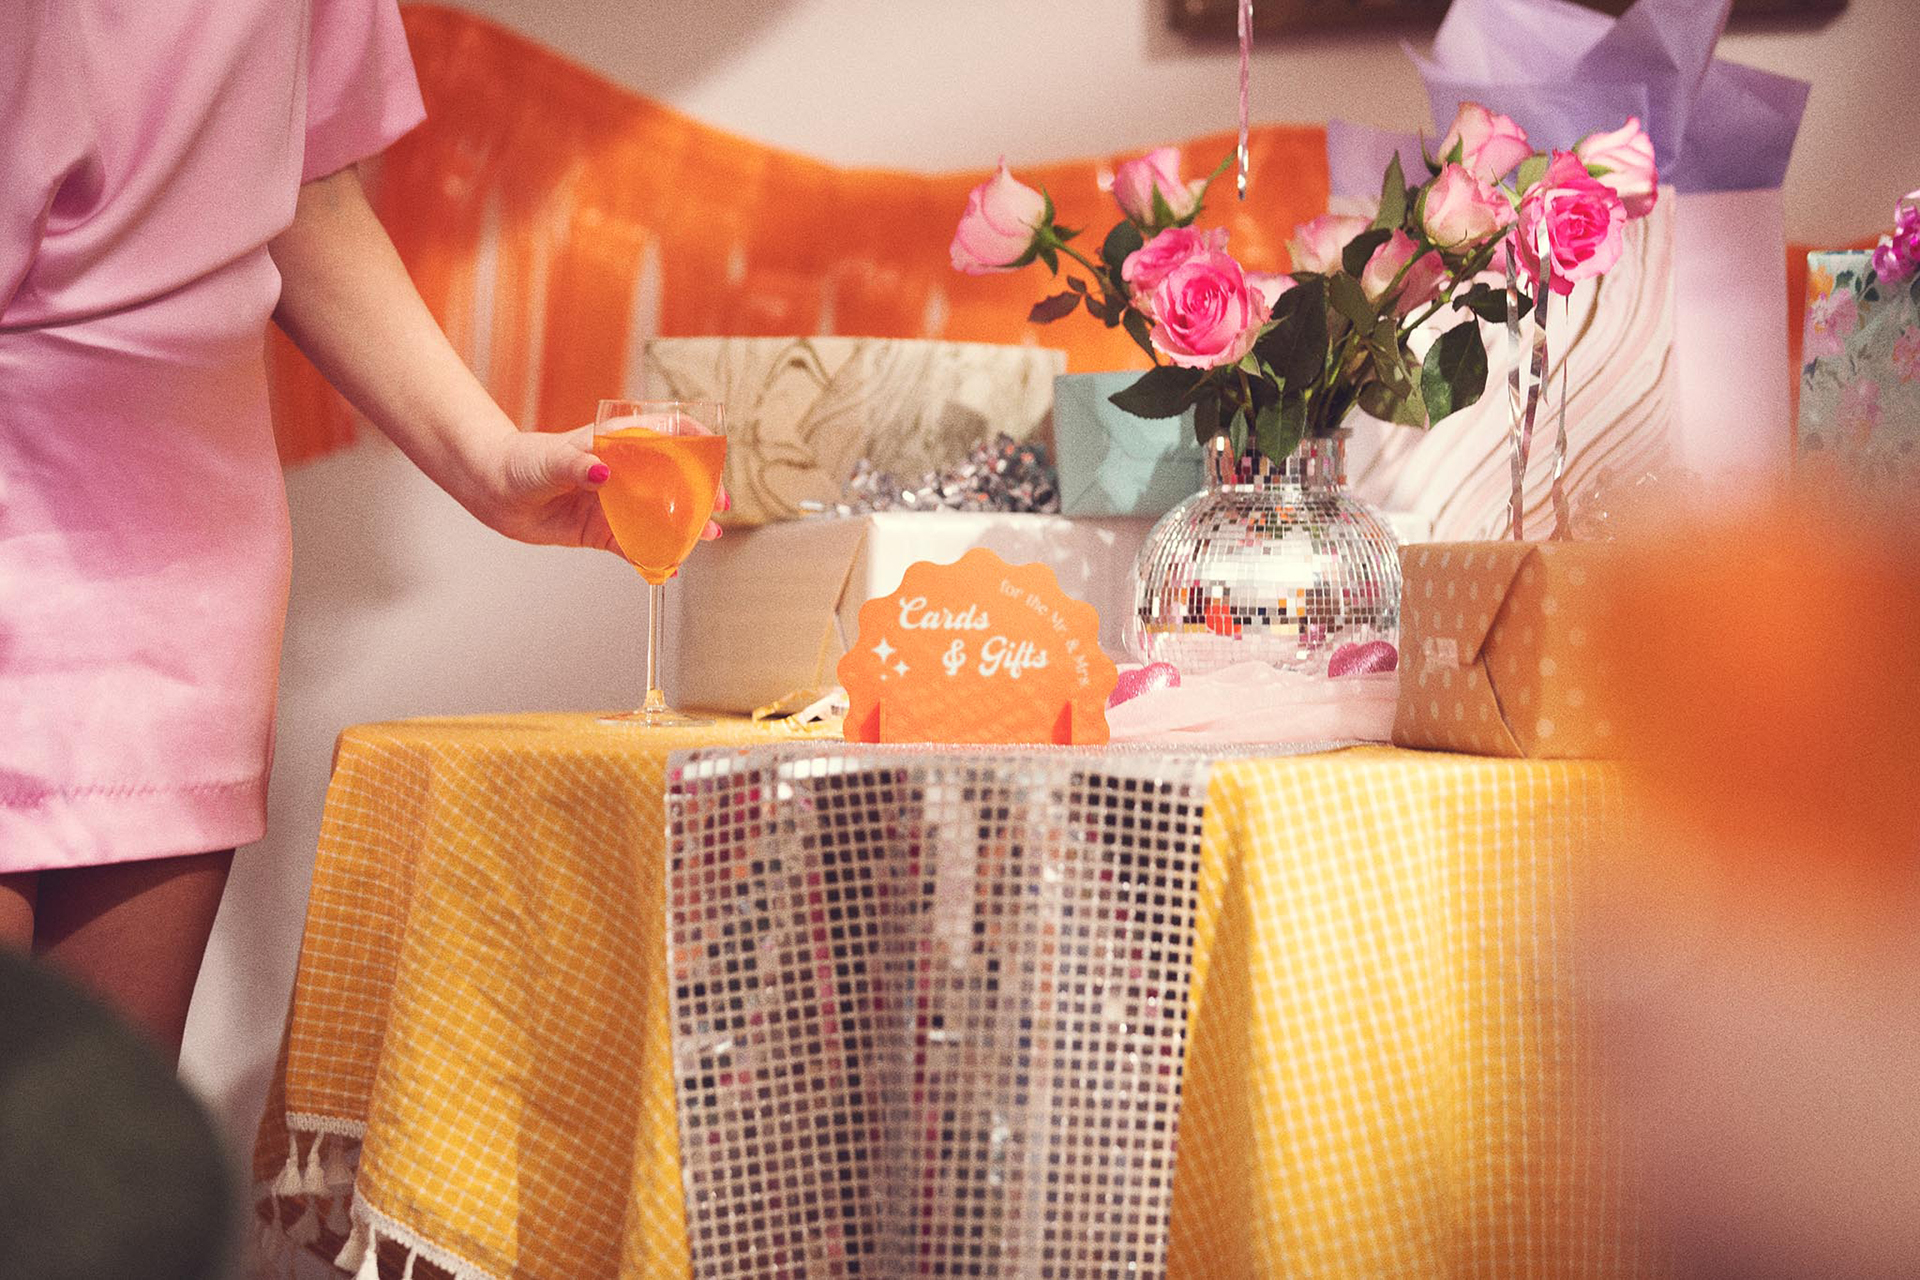 Just engaged? Throw the ultimate engagement party with Cricut!